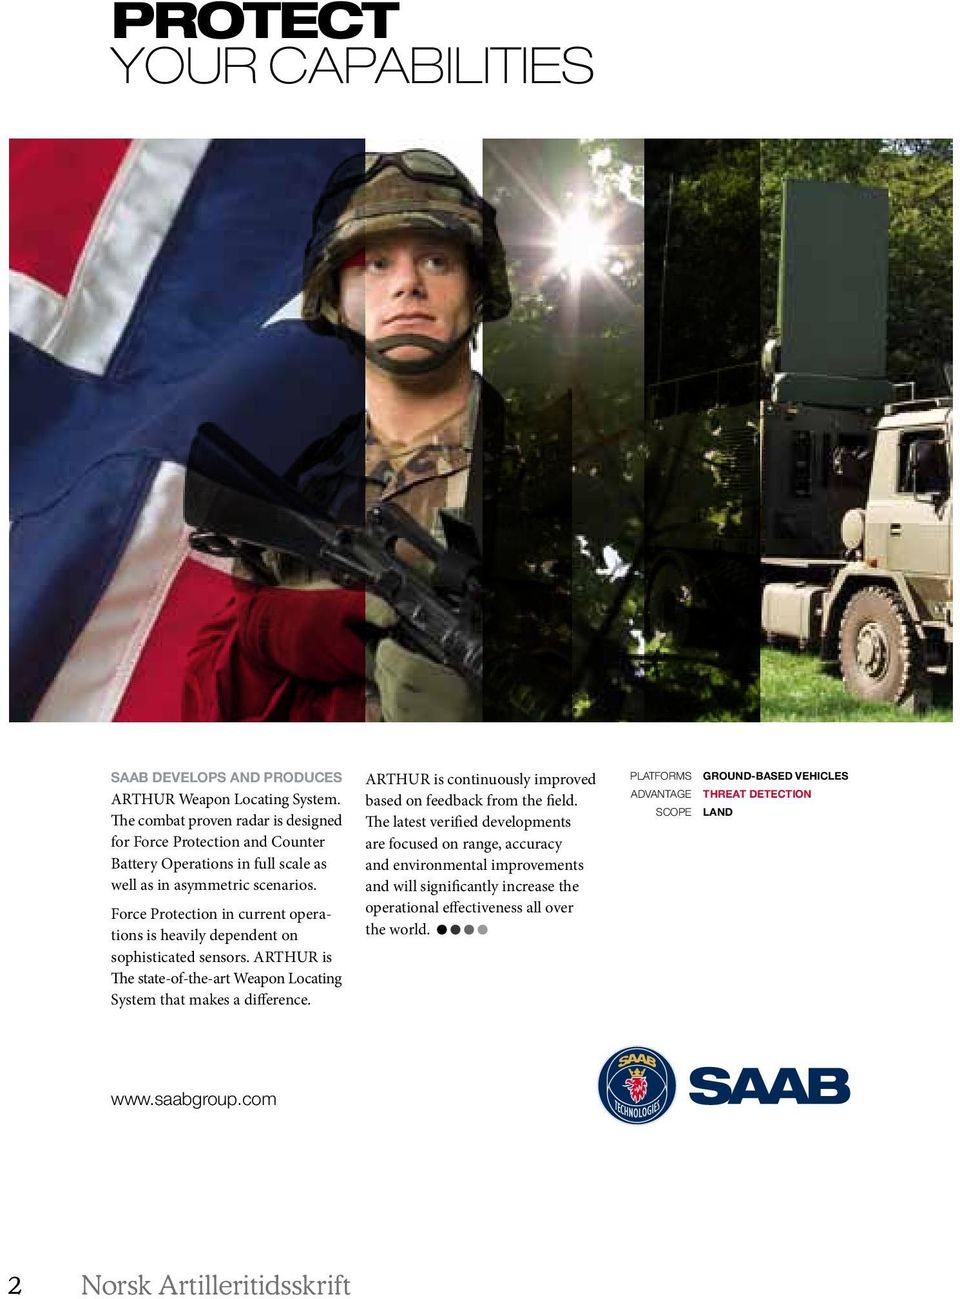 Force Protection in current operations is heavily dependent on sophisticated sensors. ARTHUR is The state-of-the-art Weapon Locating System that makes a difference.